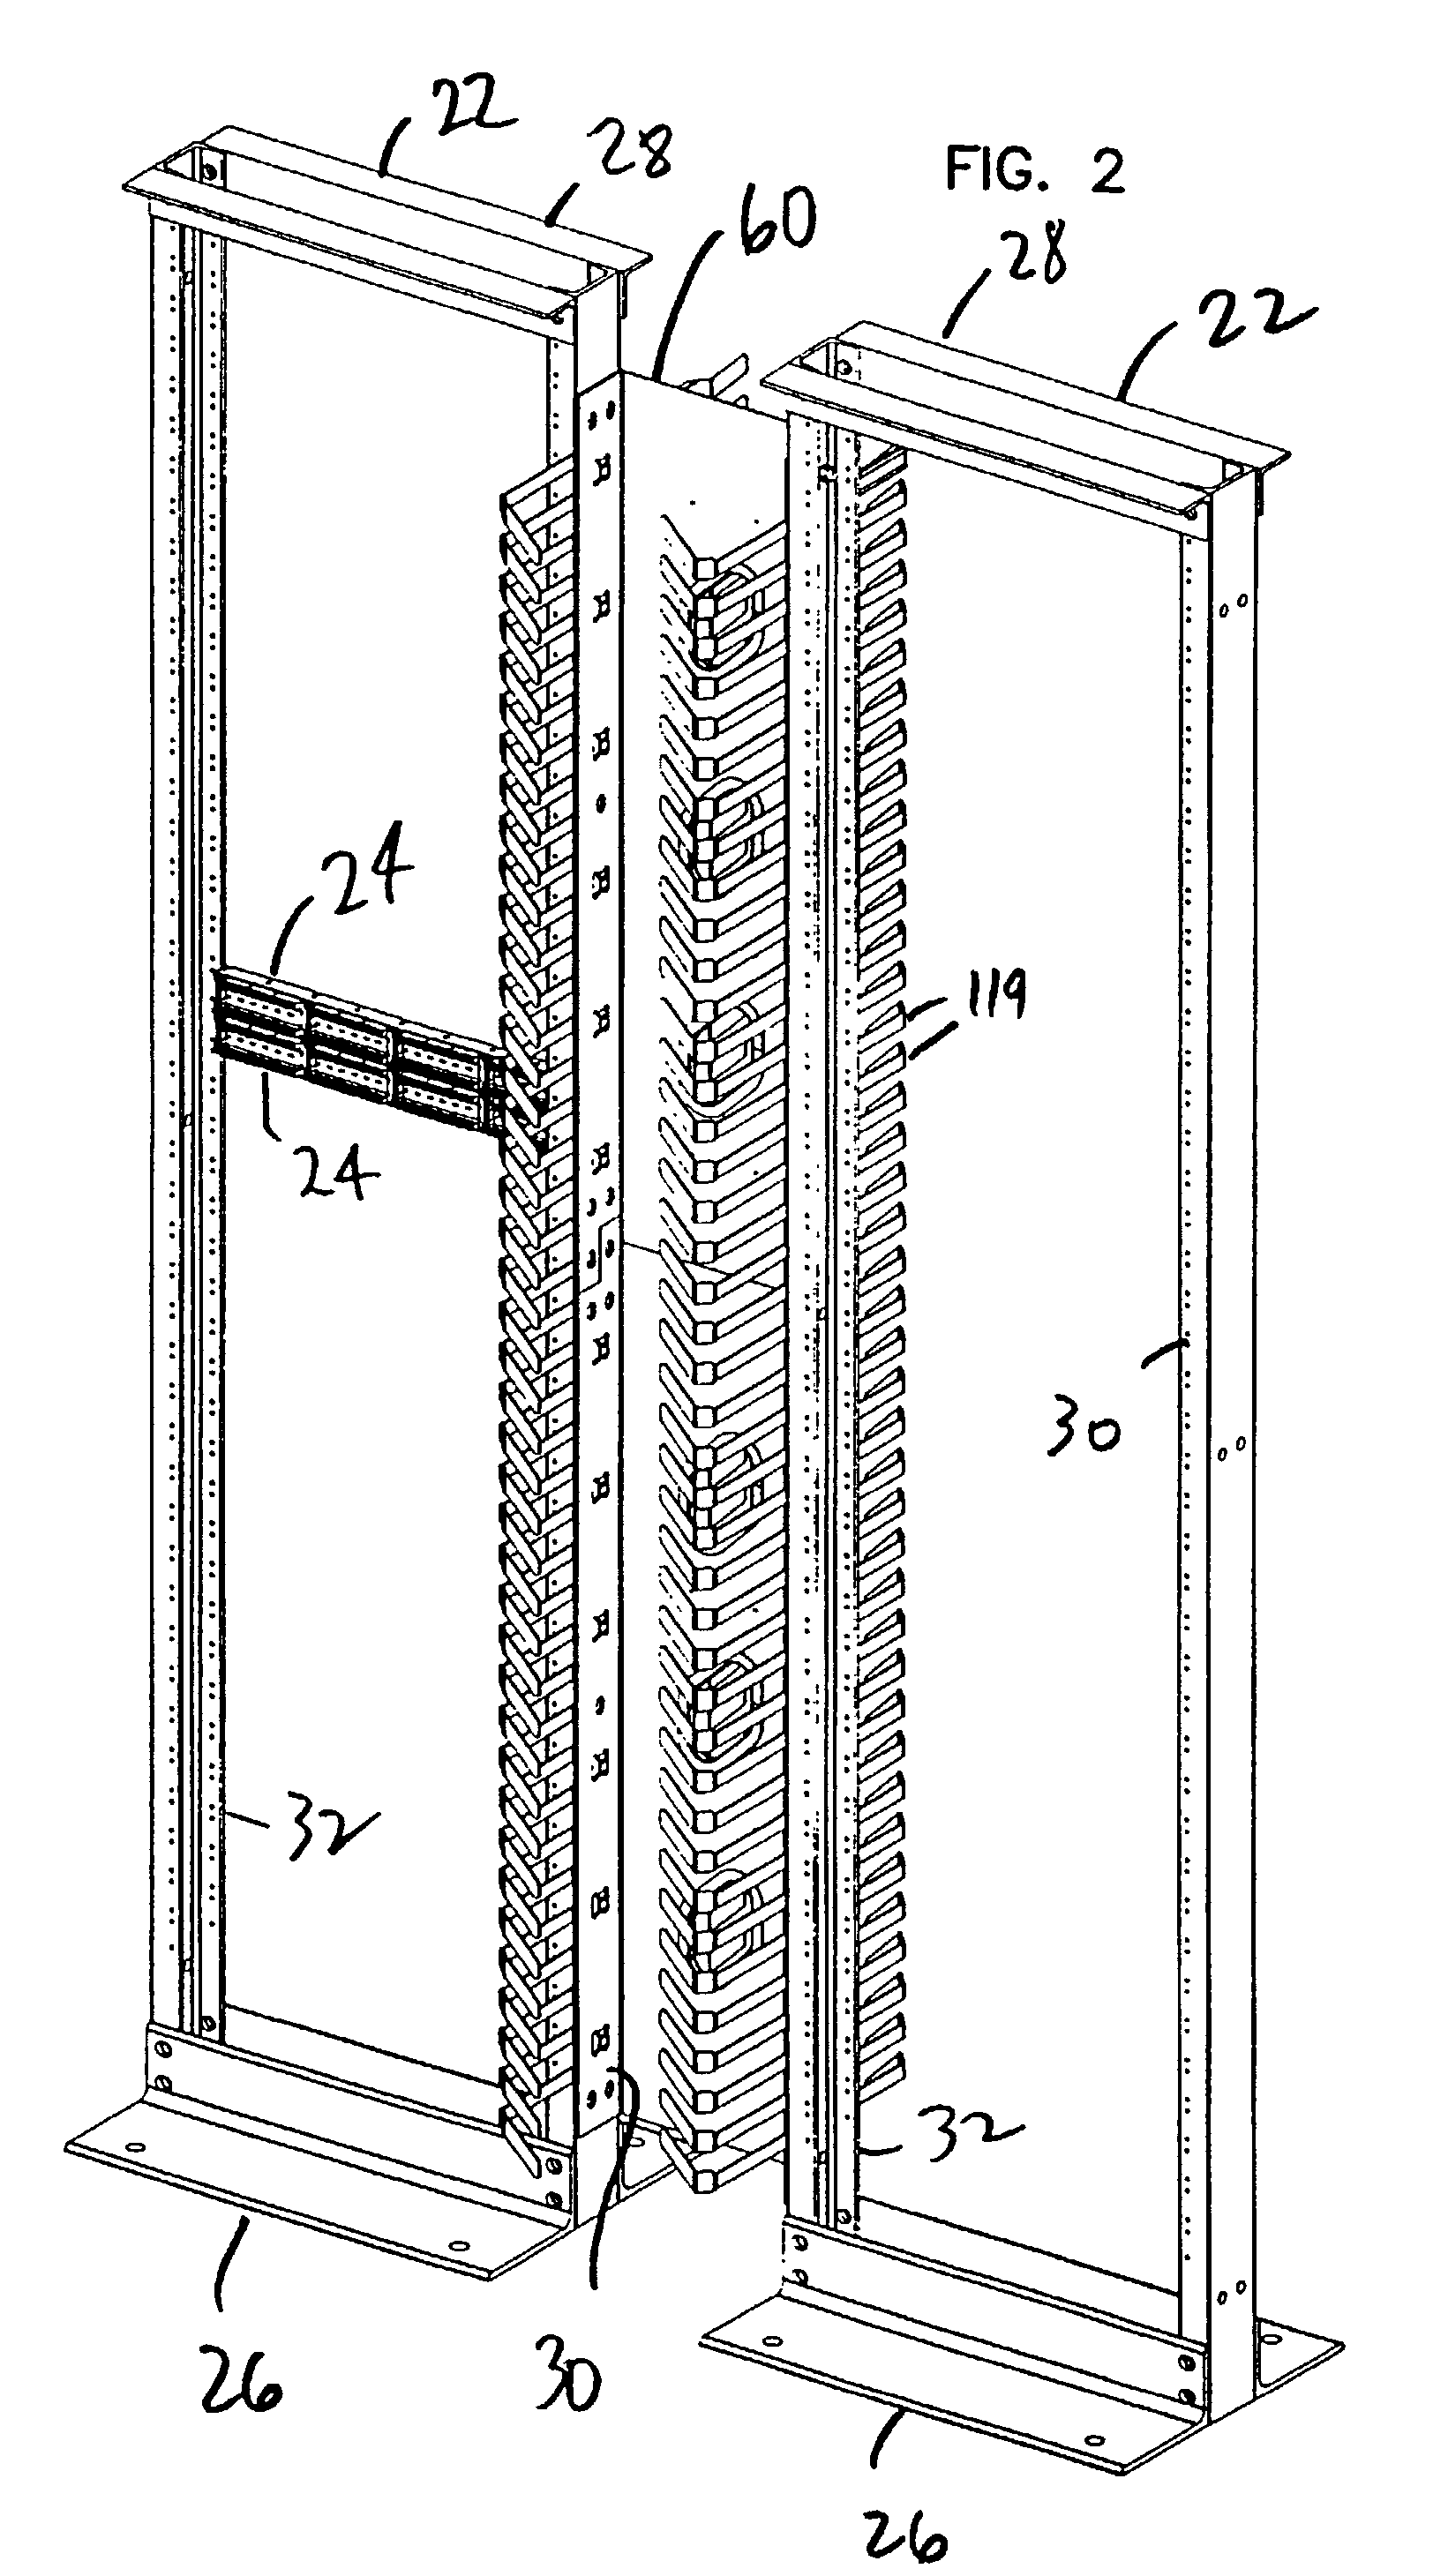 Vertical cable management system with ribcage structure